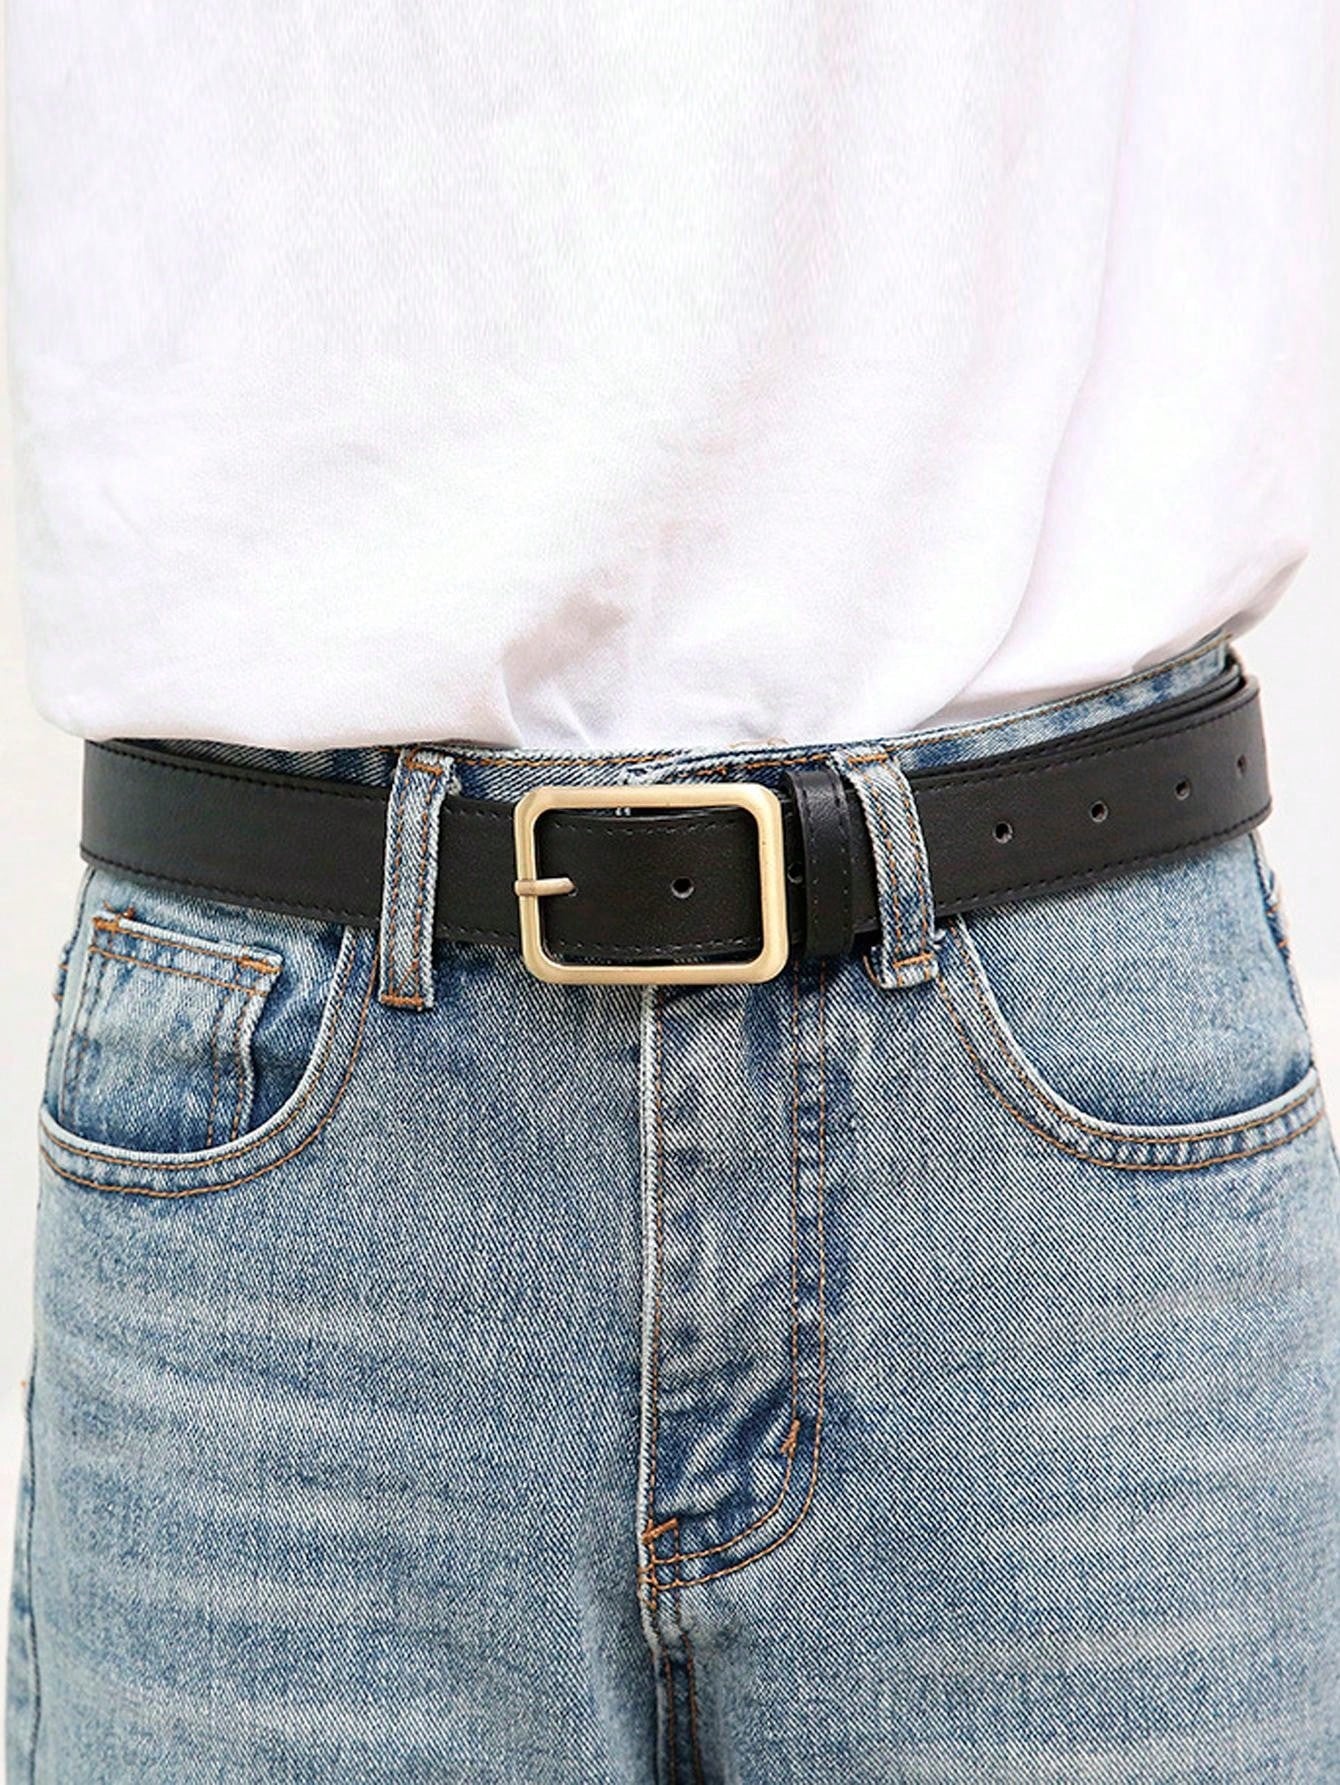 1pc Fashion Casual Black Solid Square Buckle Women Belt Girdle For Daily Life